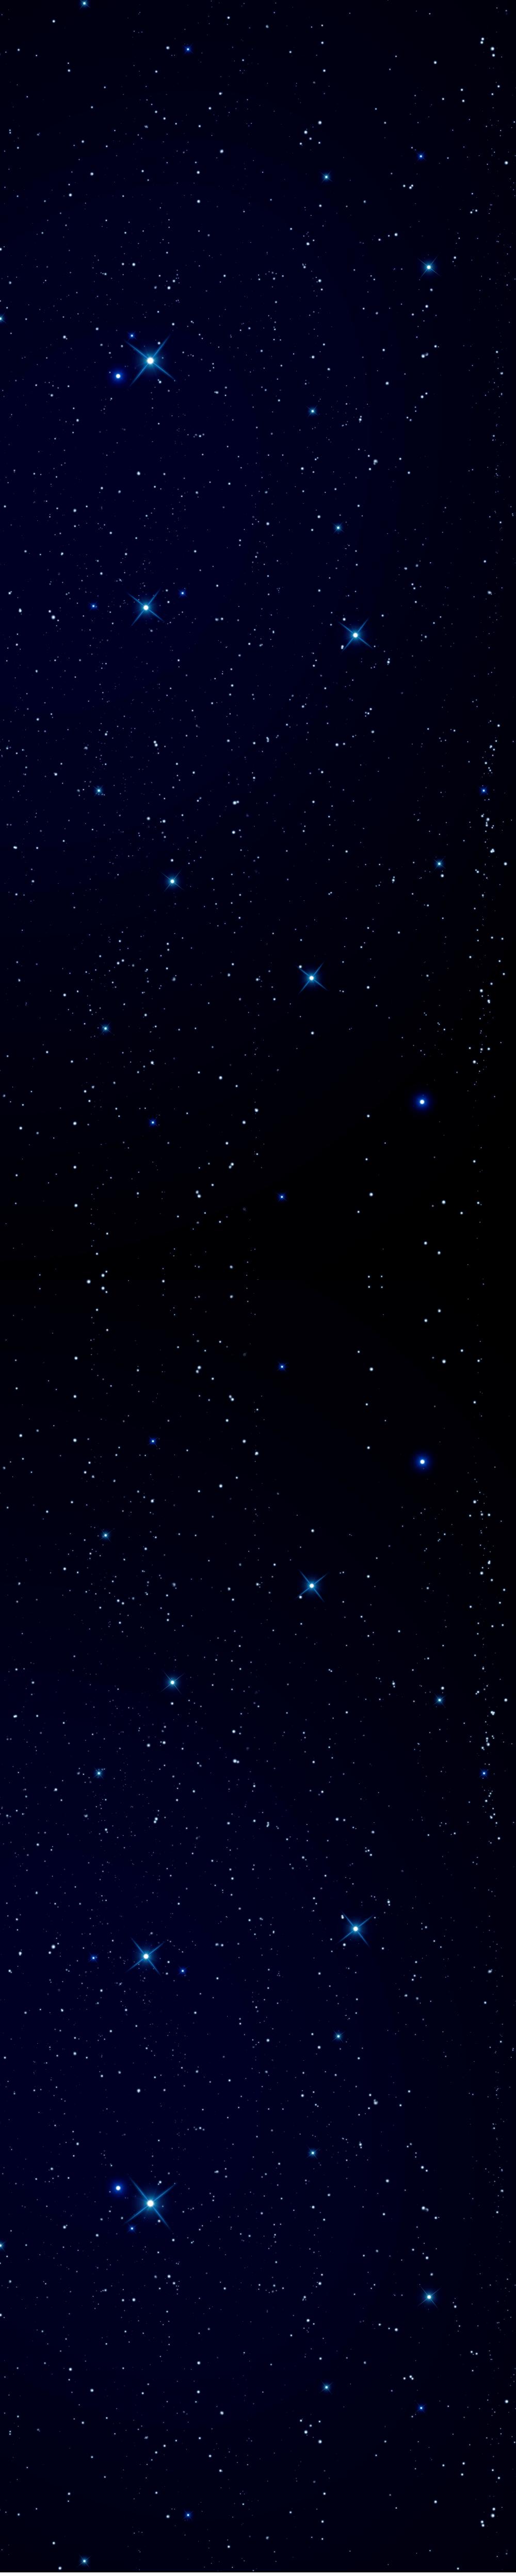 Night Sky Backgrounds - Wallpaper Cave